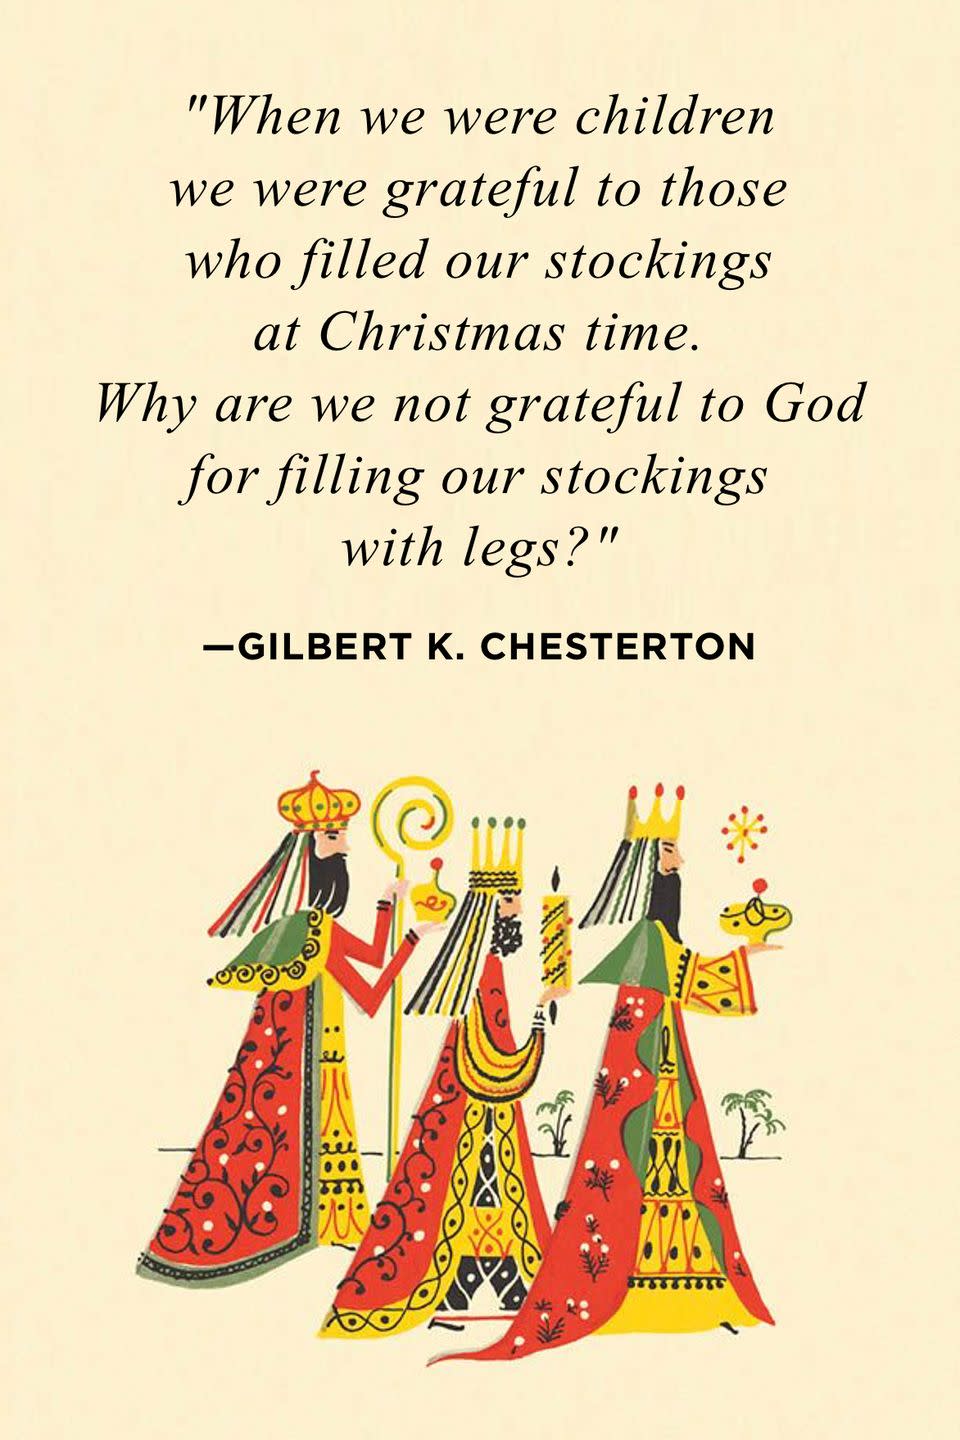 <p>"When we were children we were grateful to those who filled our stockings at Christmas time. Why are we not grateful to God for filling our stockings with legs?"</p>